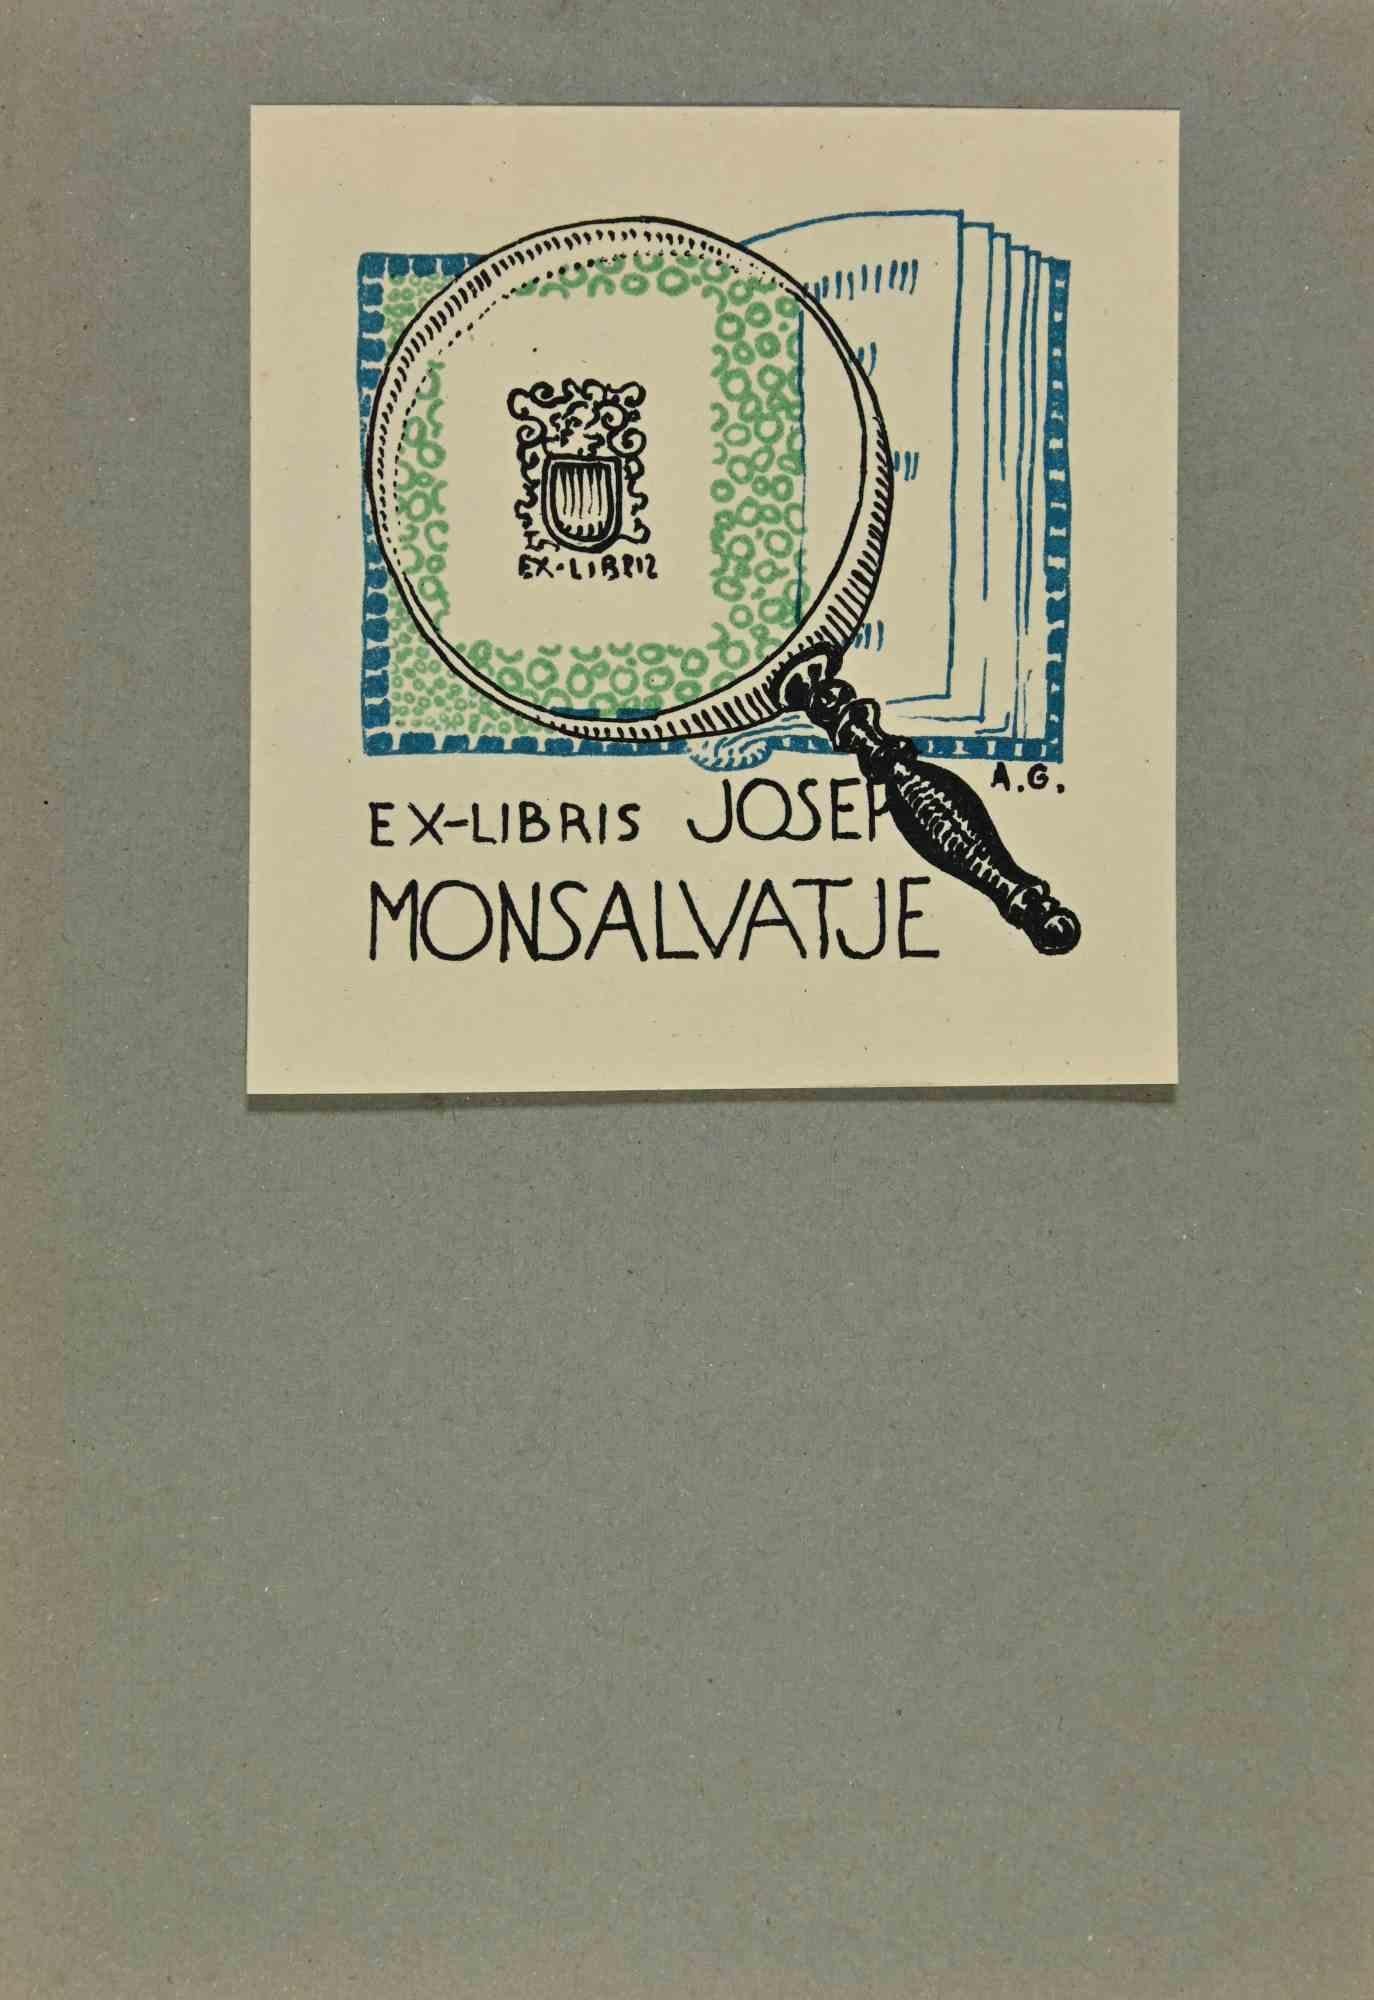  Ex Libris - Josep Monsalvatje - Woodcut - Early 20th Century - Art by Unknown